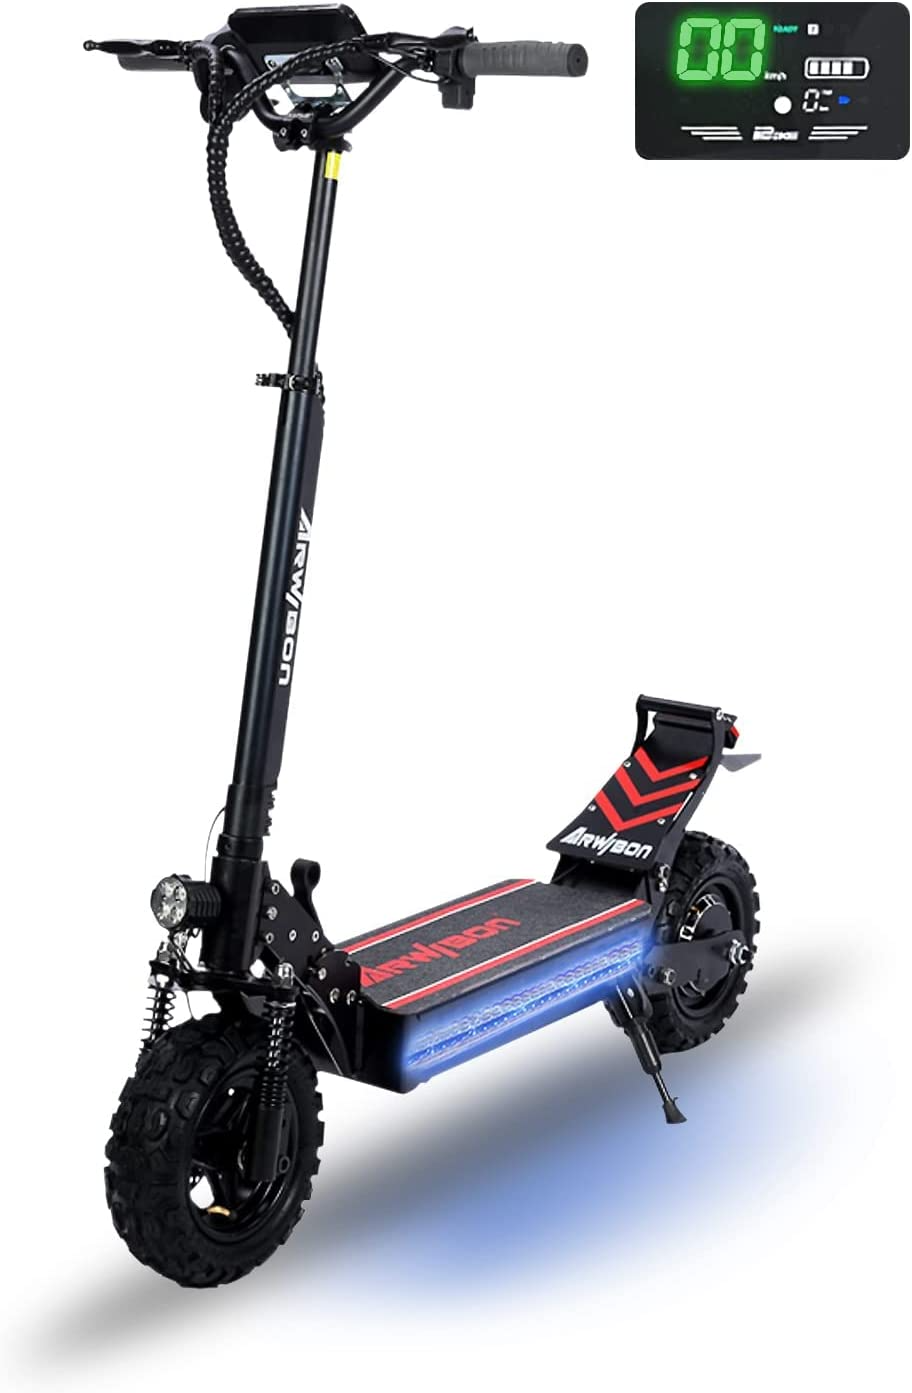 Recherclie Snow (37 Miles) Electric Scooter